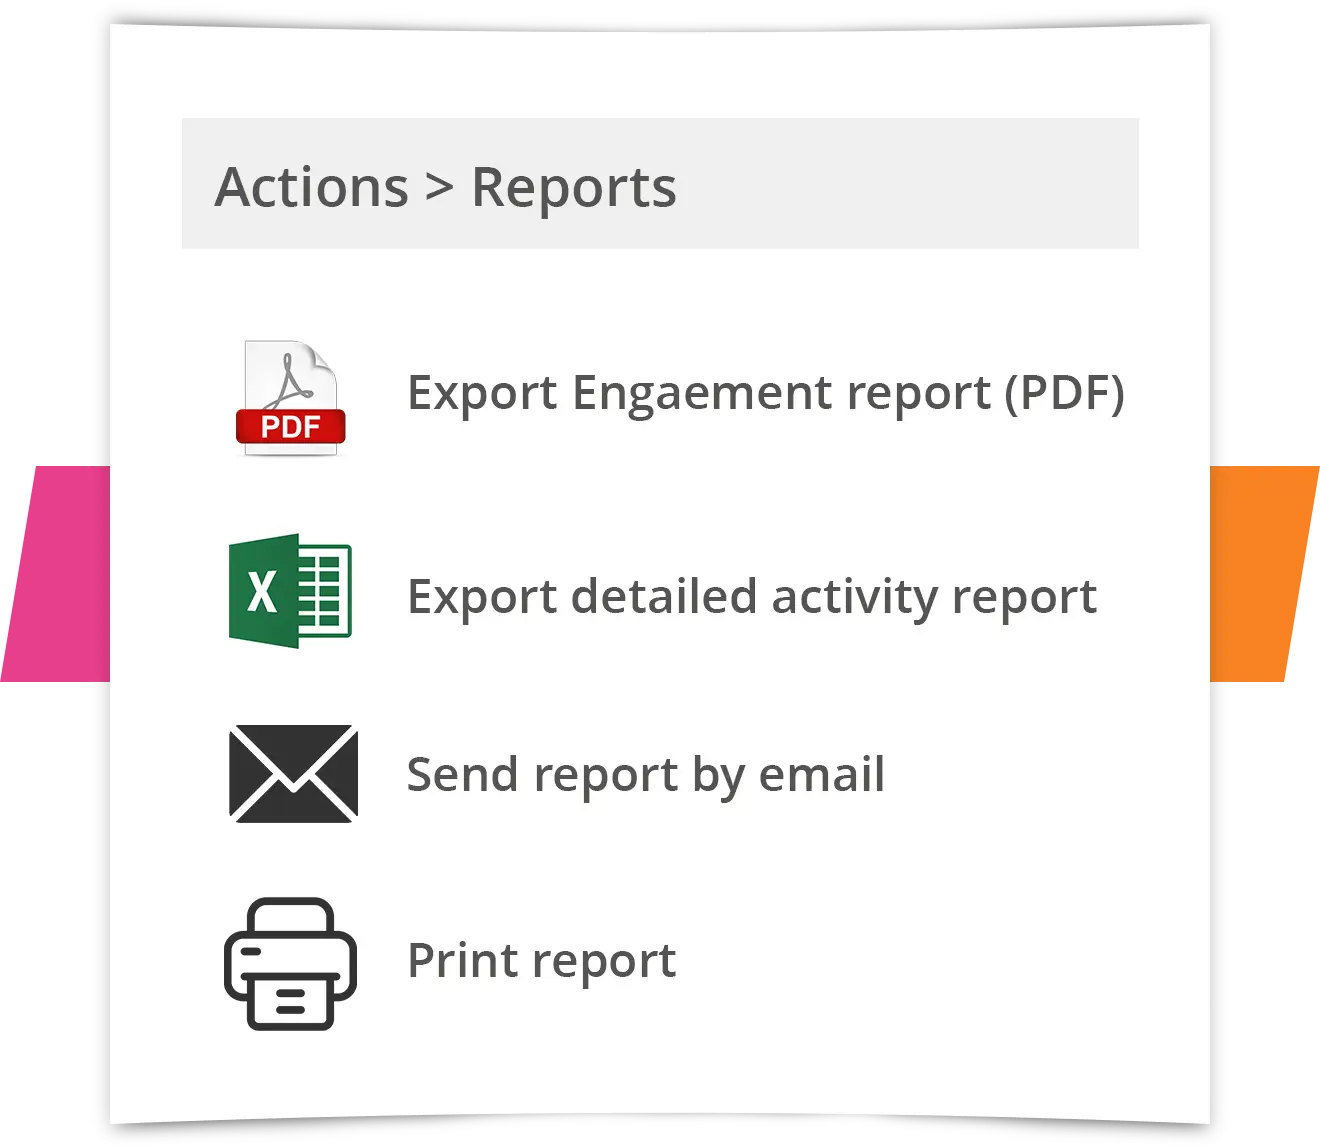 Exporting reports